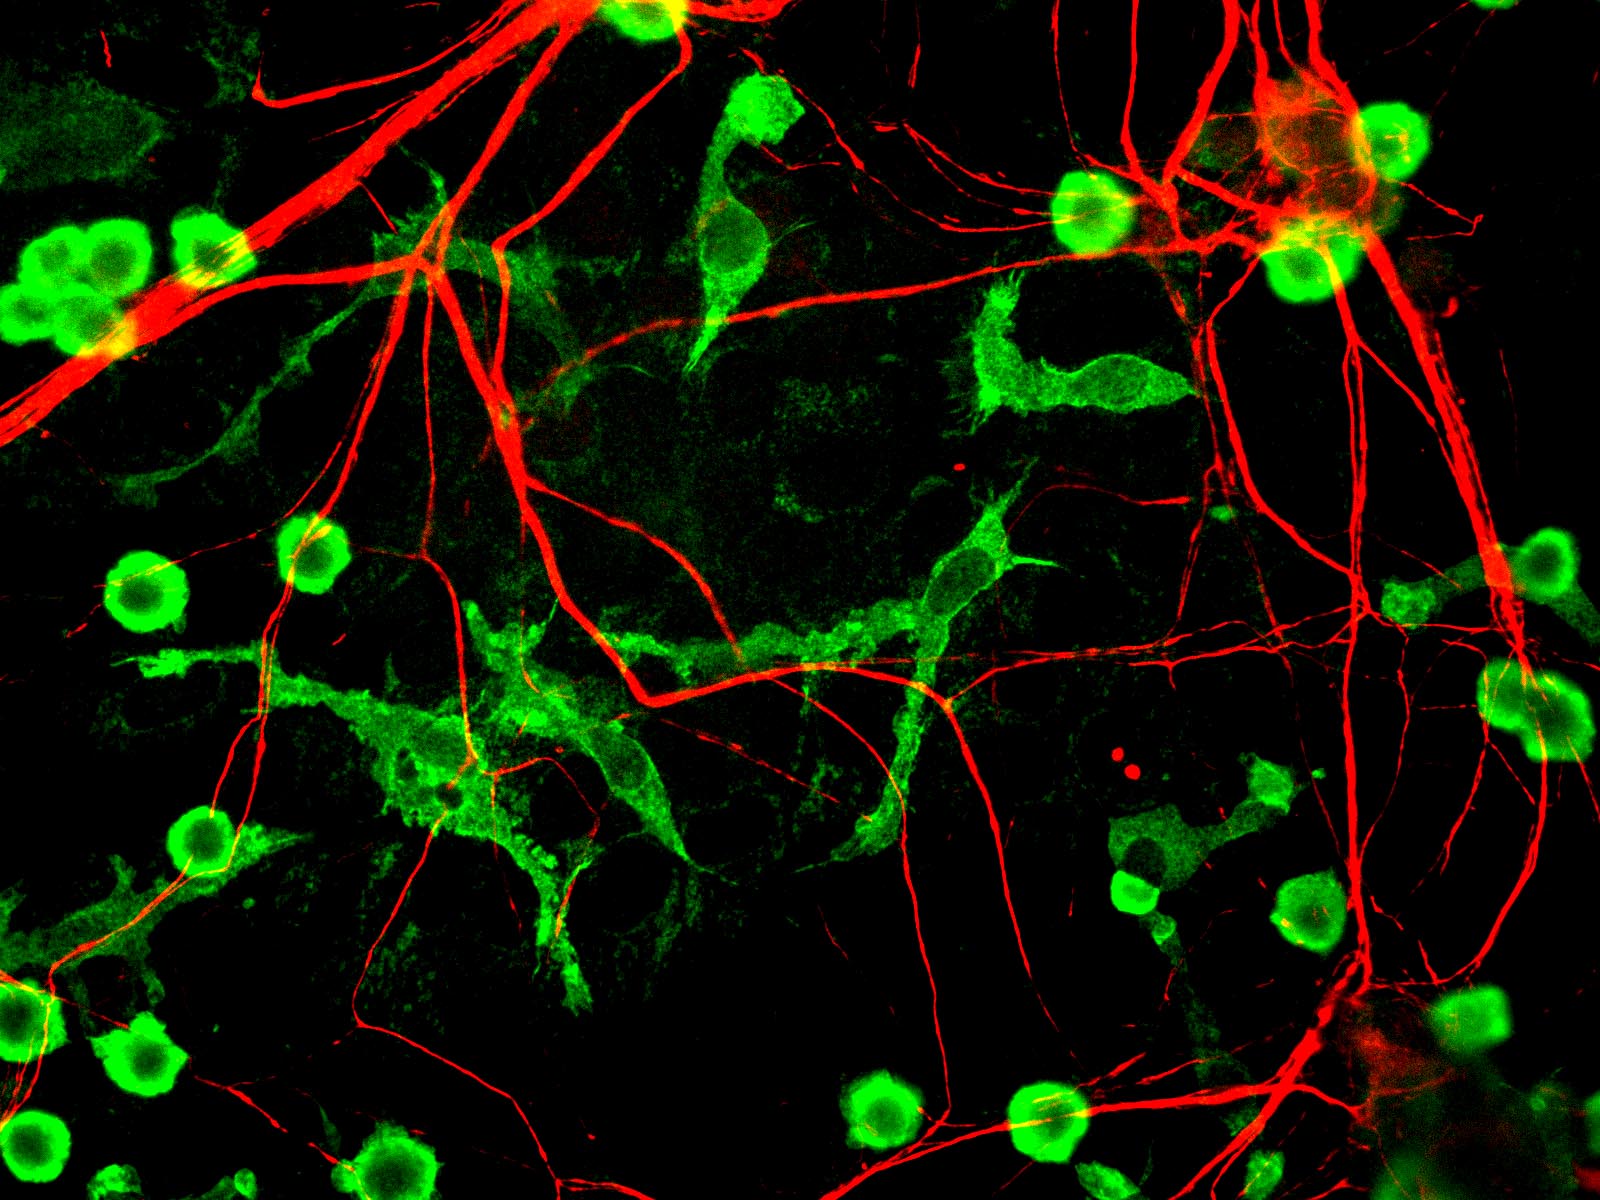 Microglia (green) and neurons (red) showing these two cell types interact closely with each other in the brain